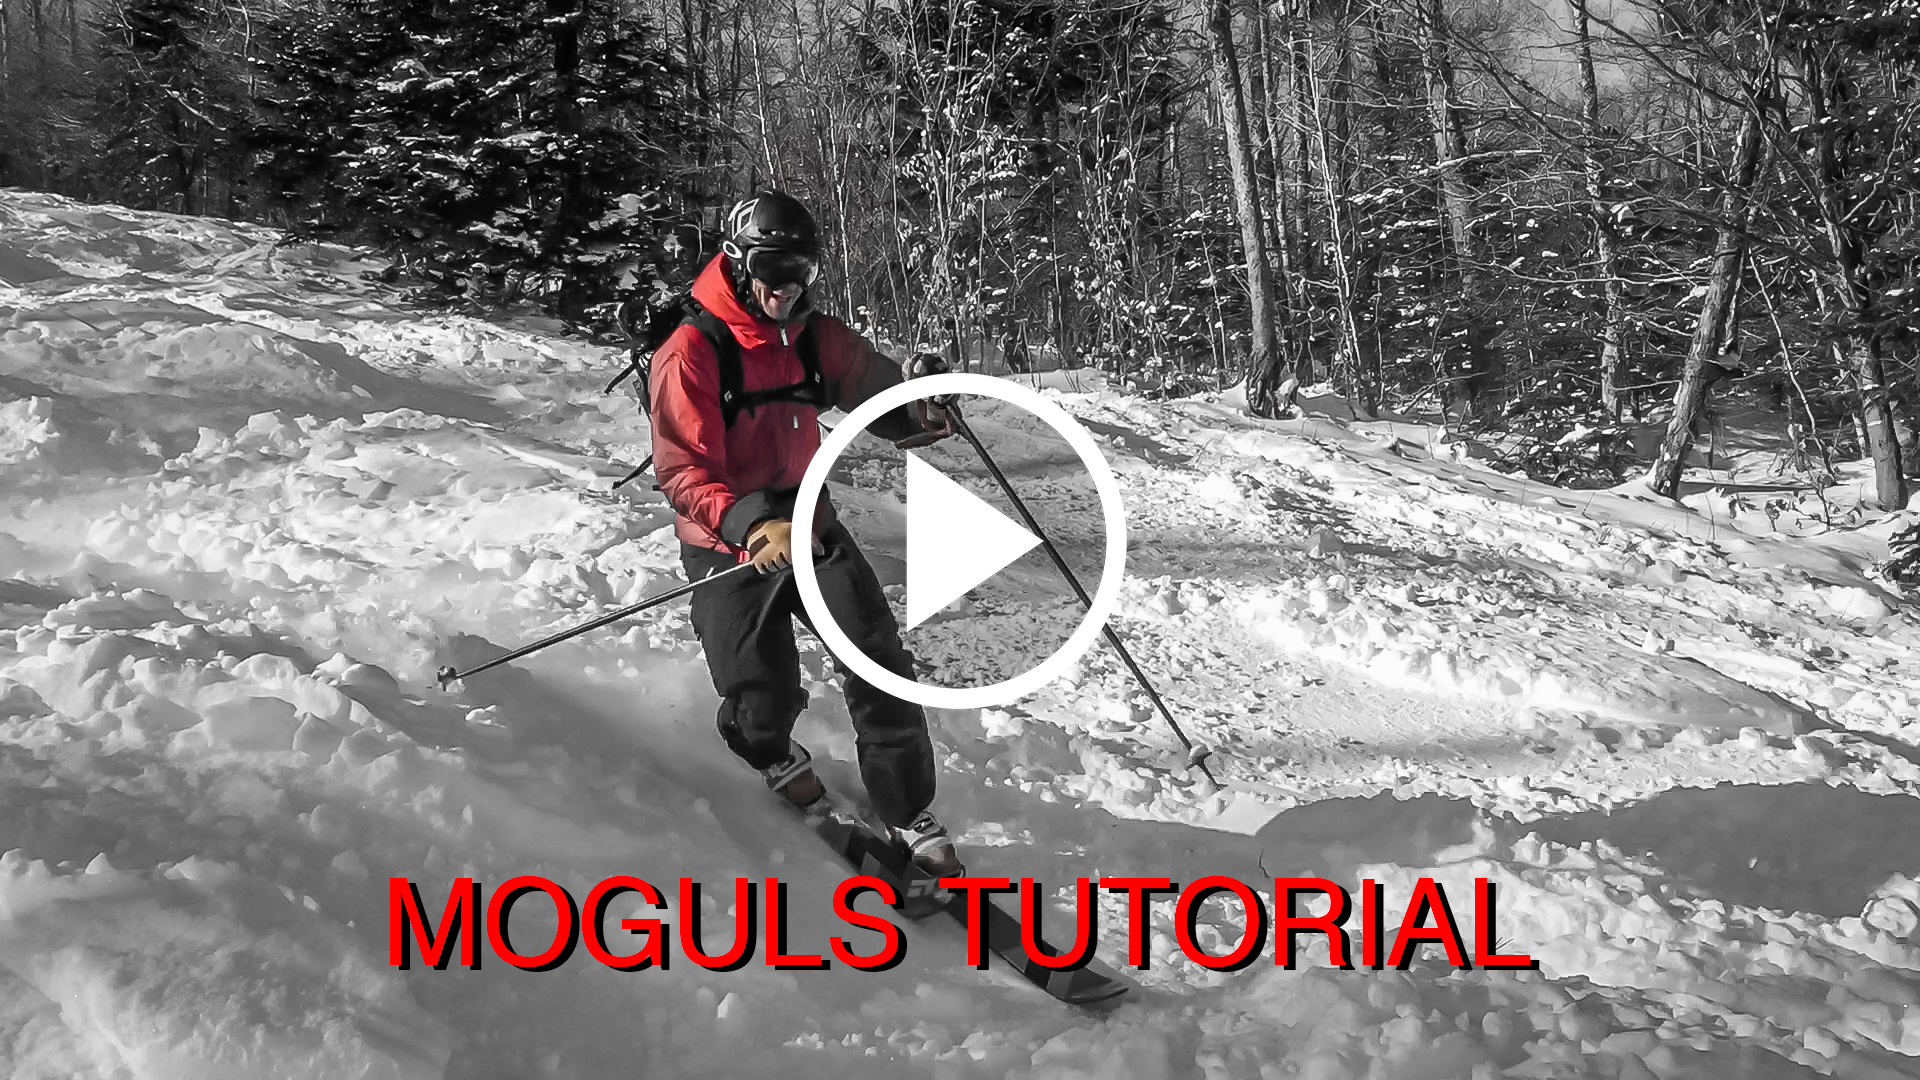 Moguls telemark picture + PLAY